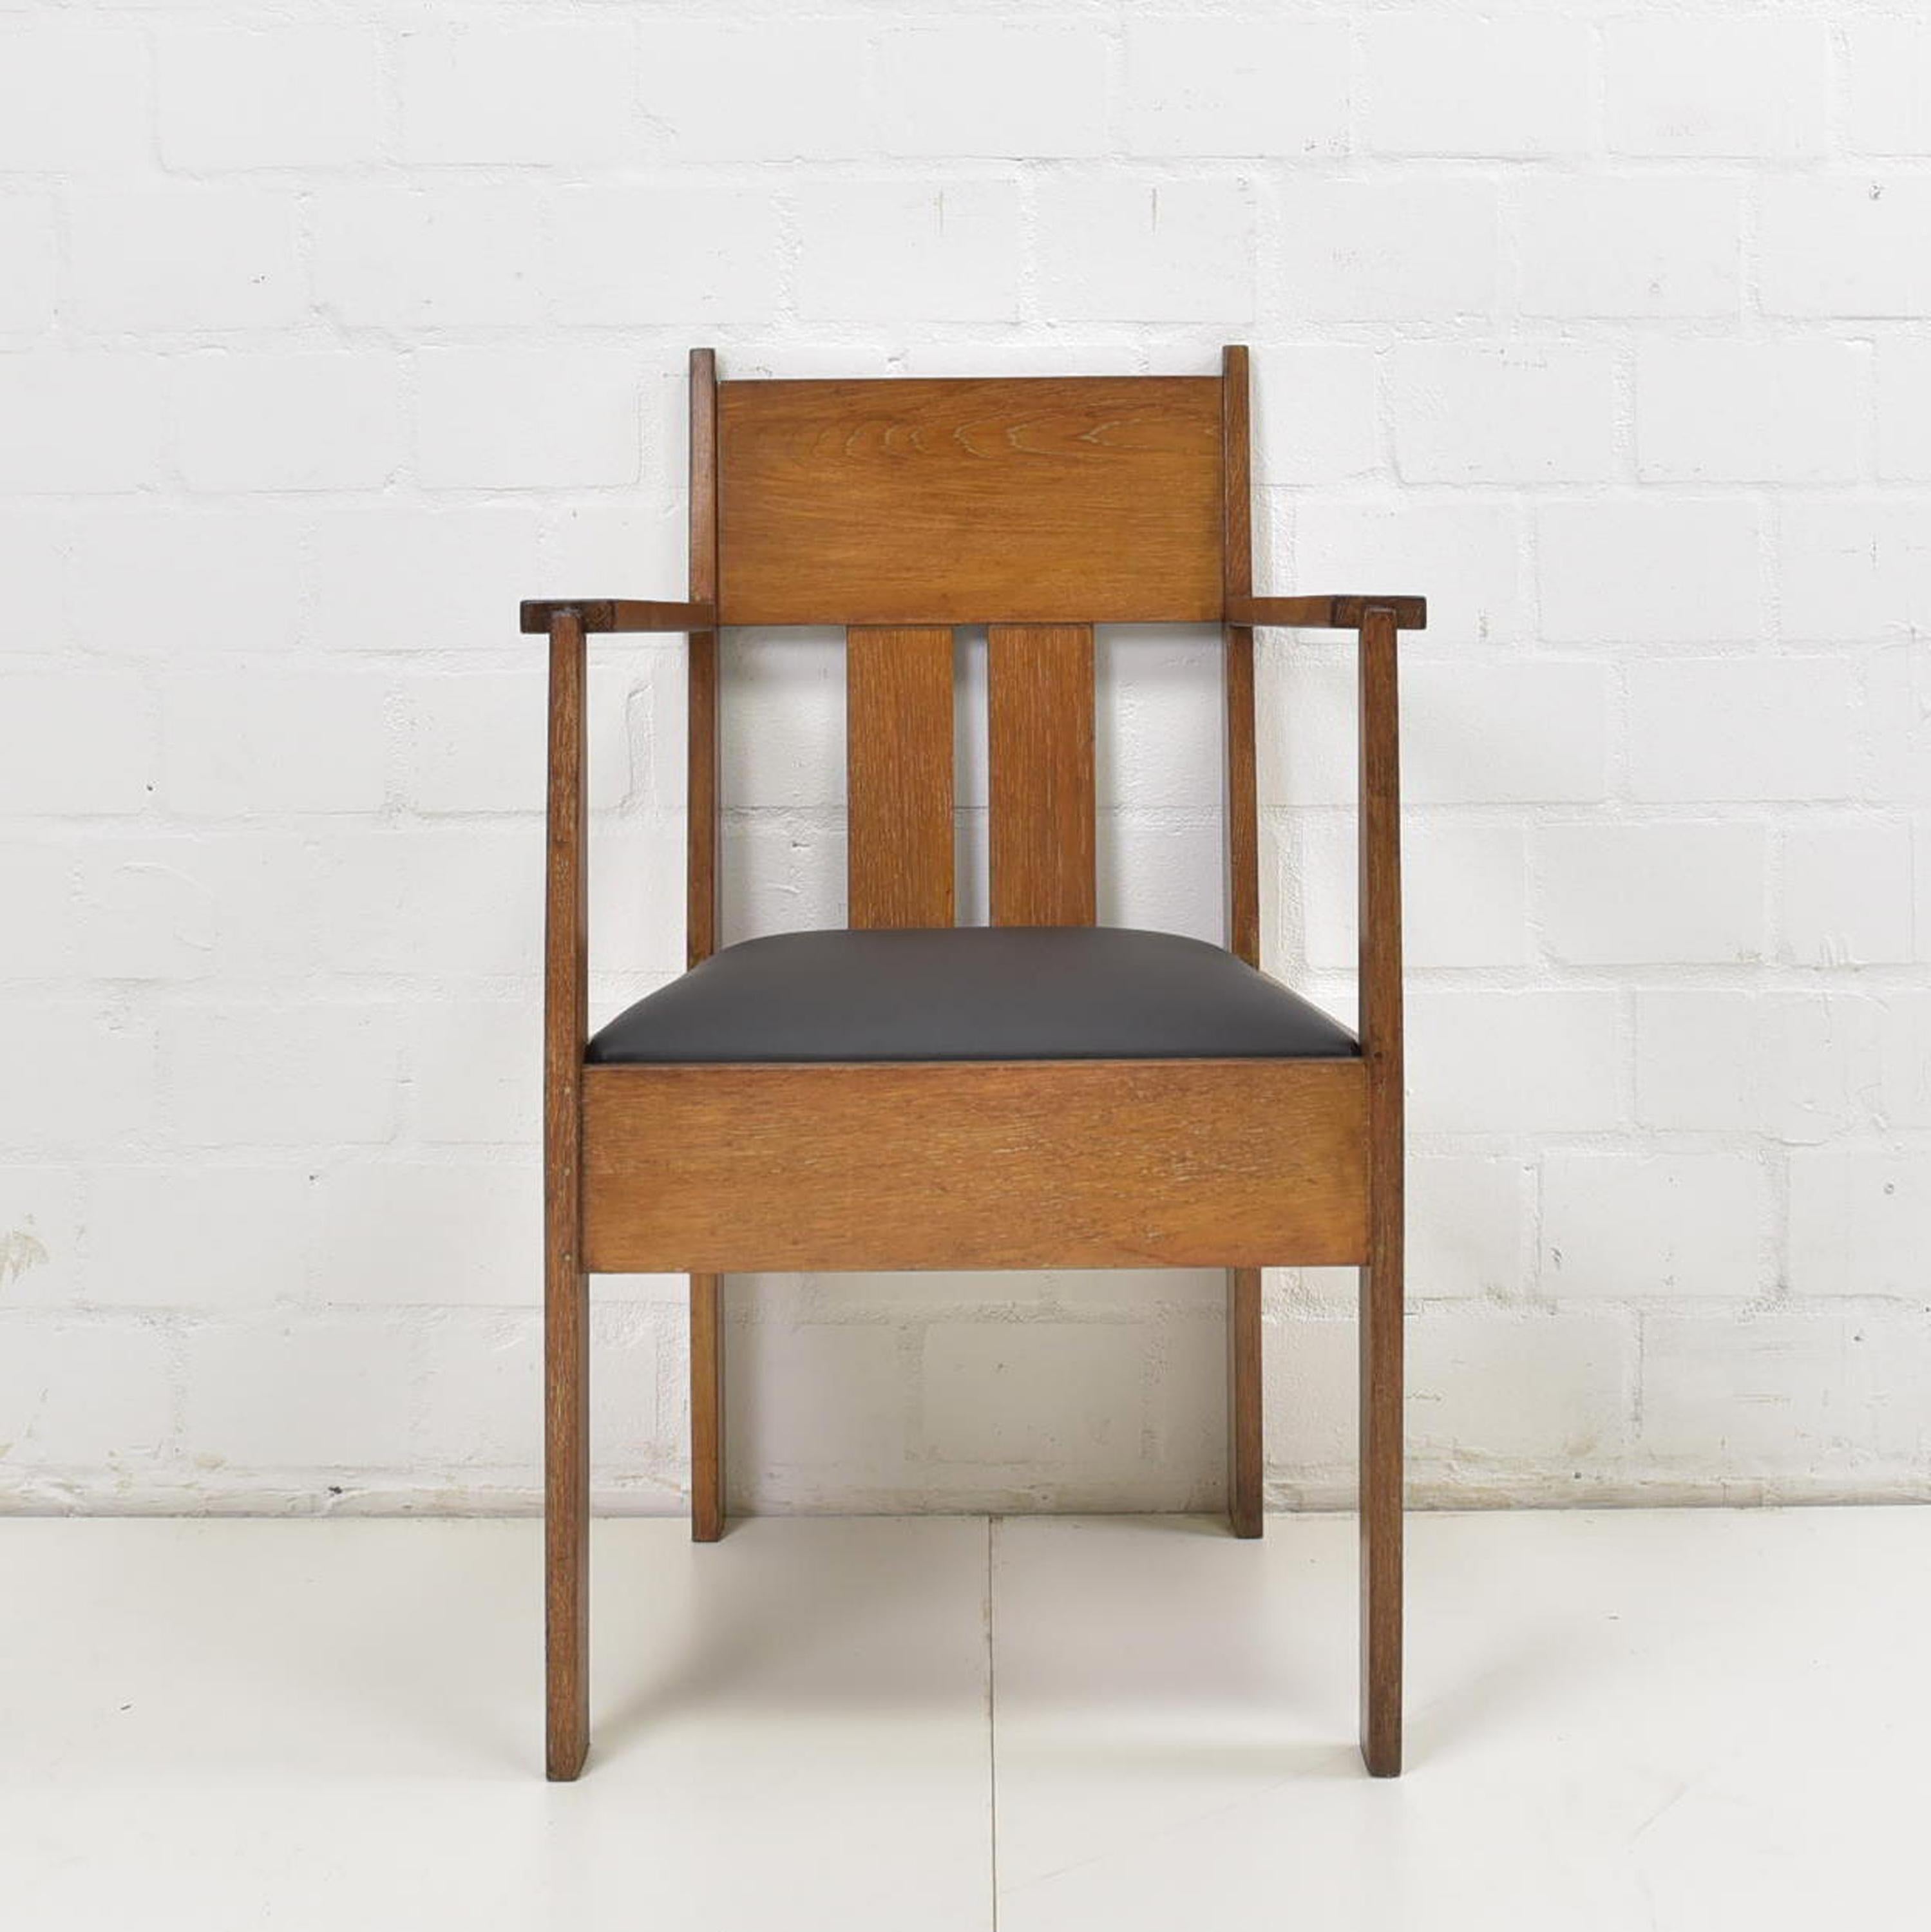 Armchair restored Bauhaus around 1930 oak armchair desk chair

Features:
Removable seat pad
Leatherette cover renewed
High quality
Stable & comfortable
Reduced design with geometric lines
Beautiful patina

Additional